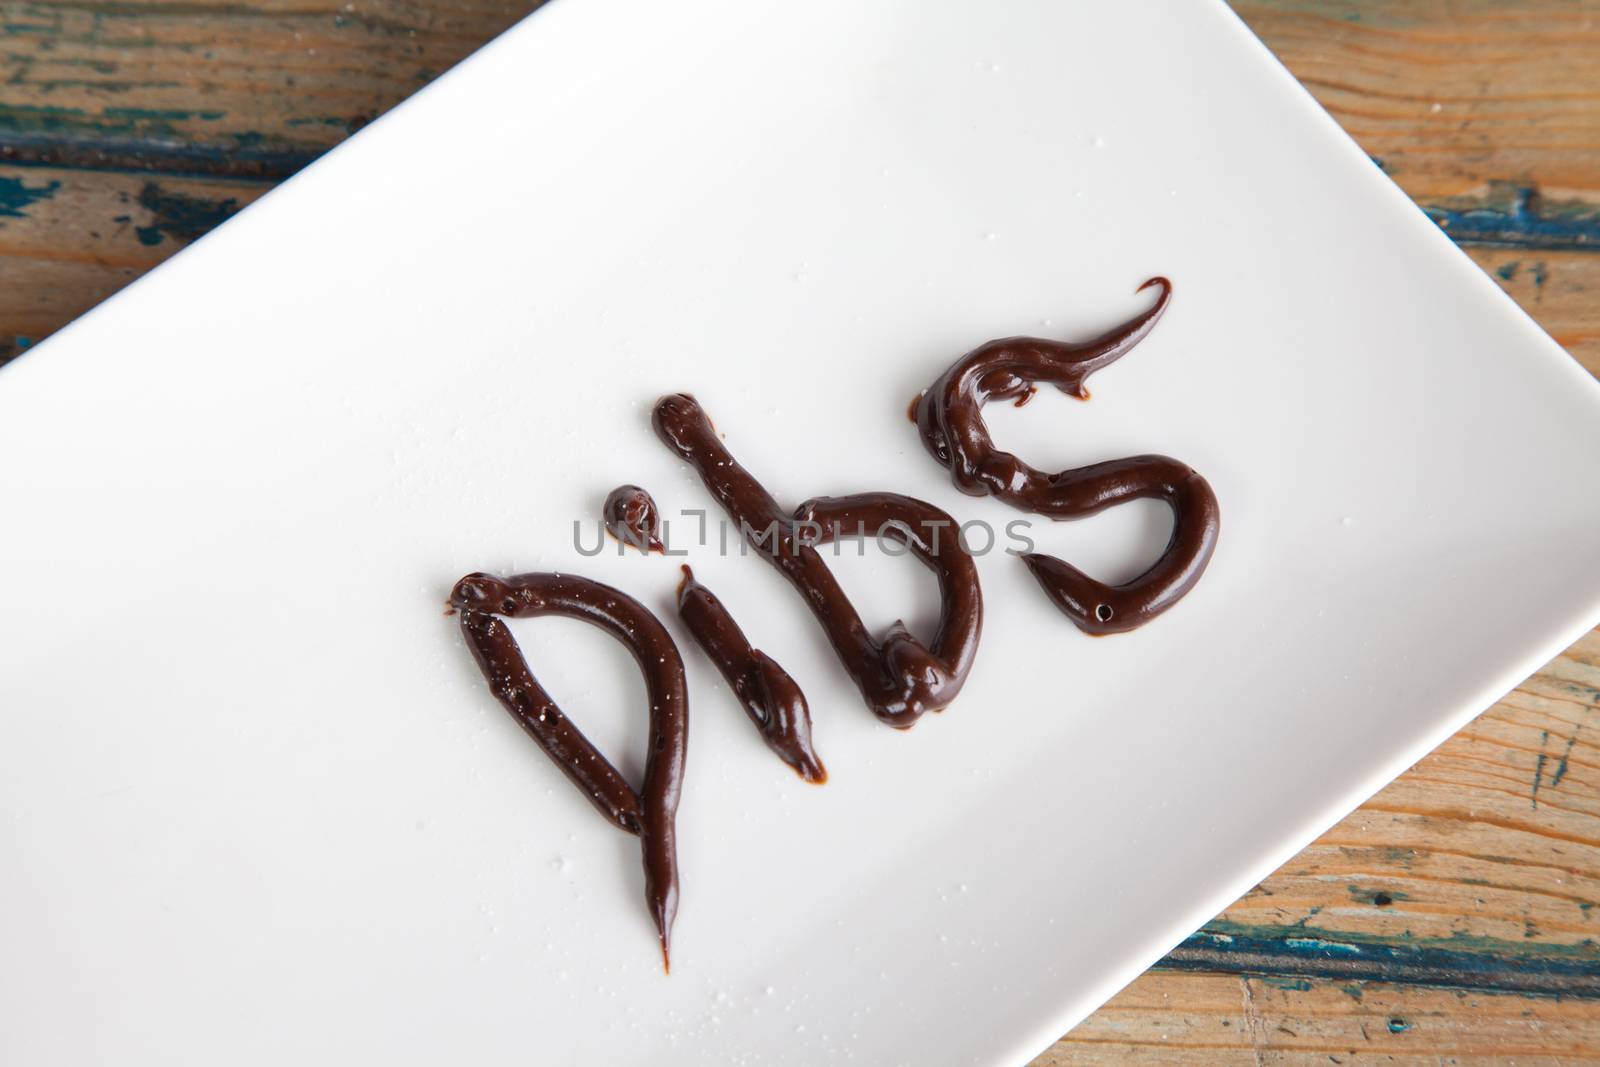 Dibs written on plate with chocolate fudge by haiderazim